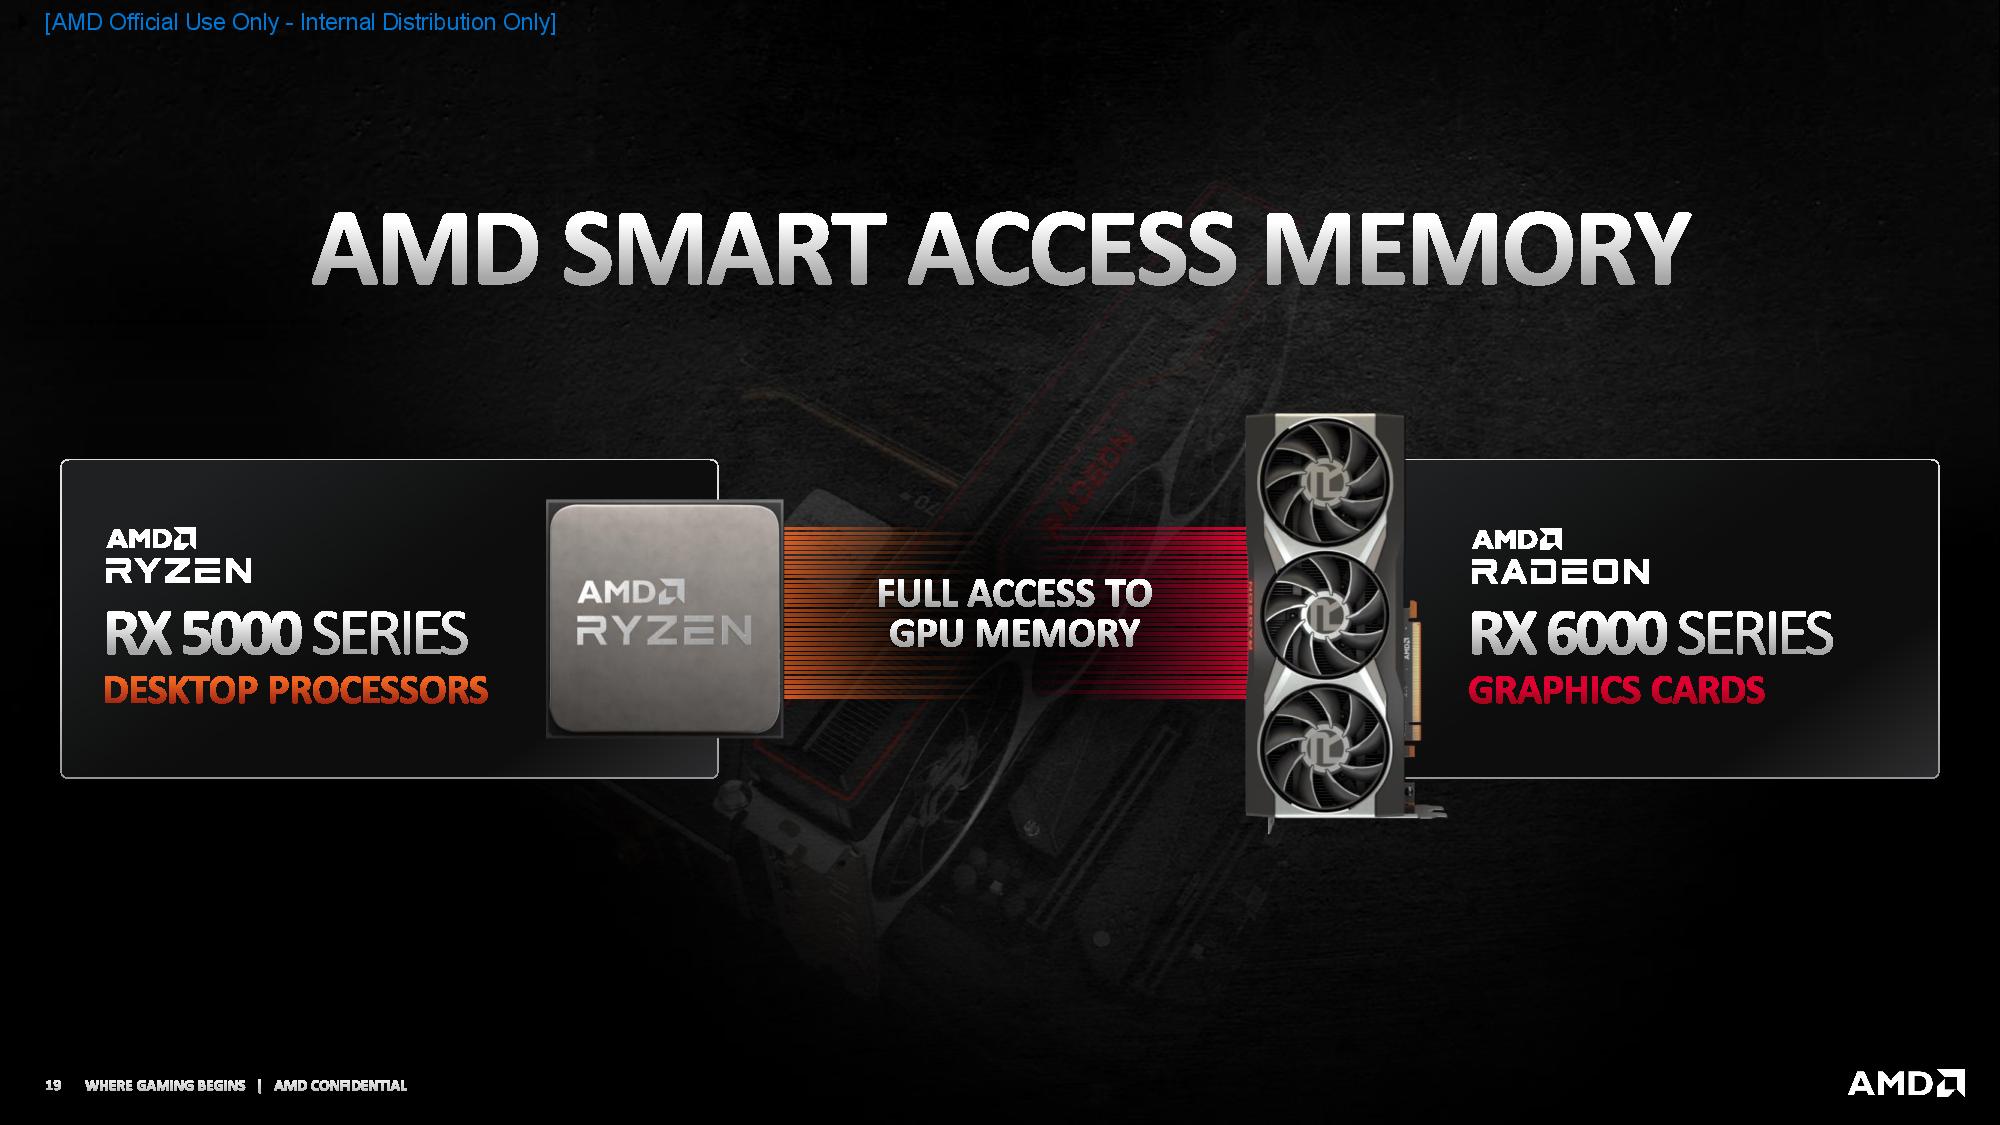 What is AMD Smart Access Memory?